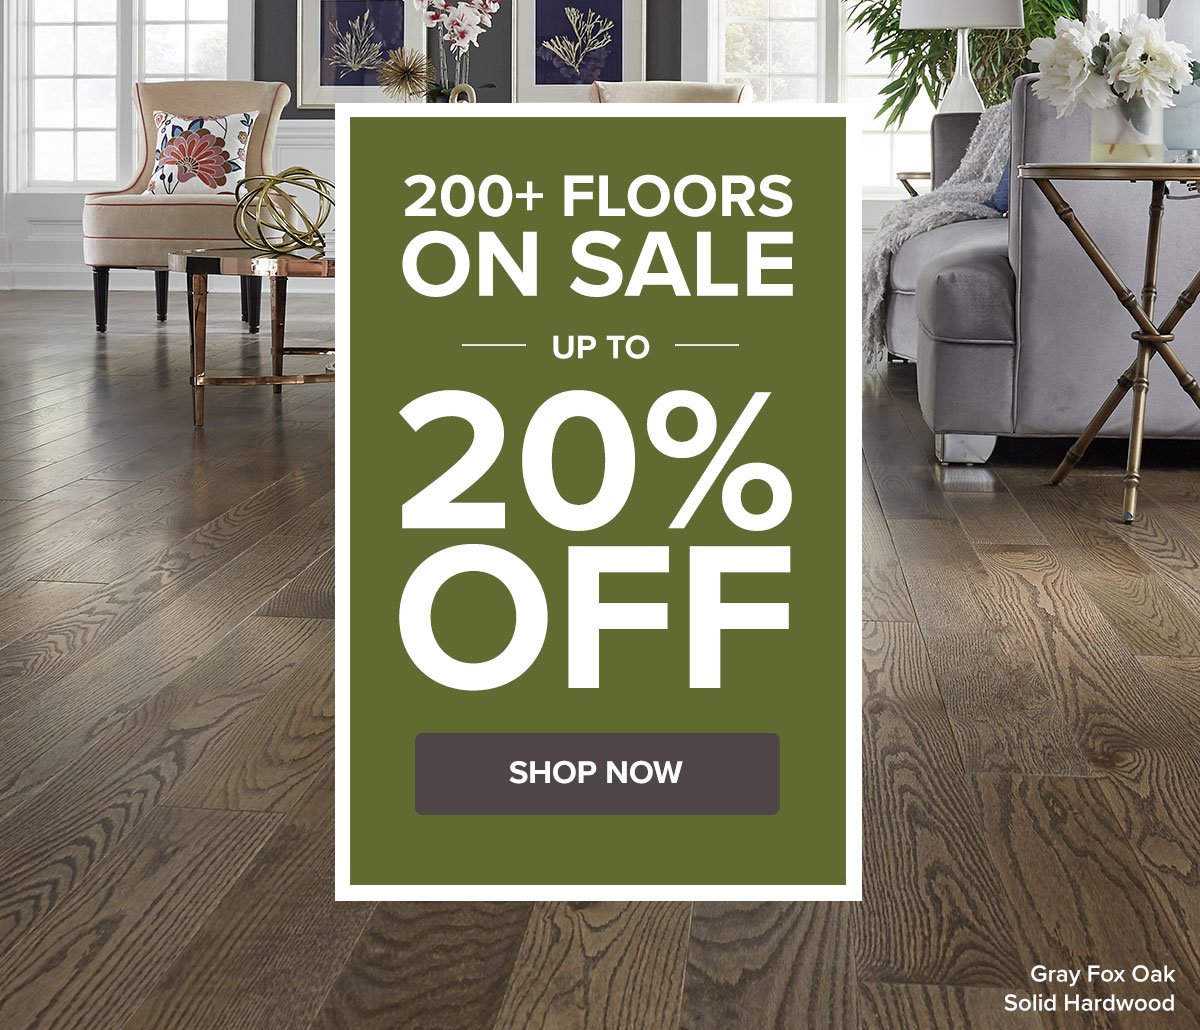 Save up to 20% | SHOP NOW